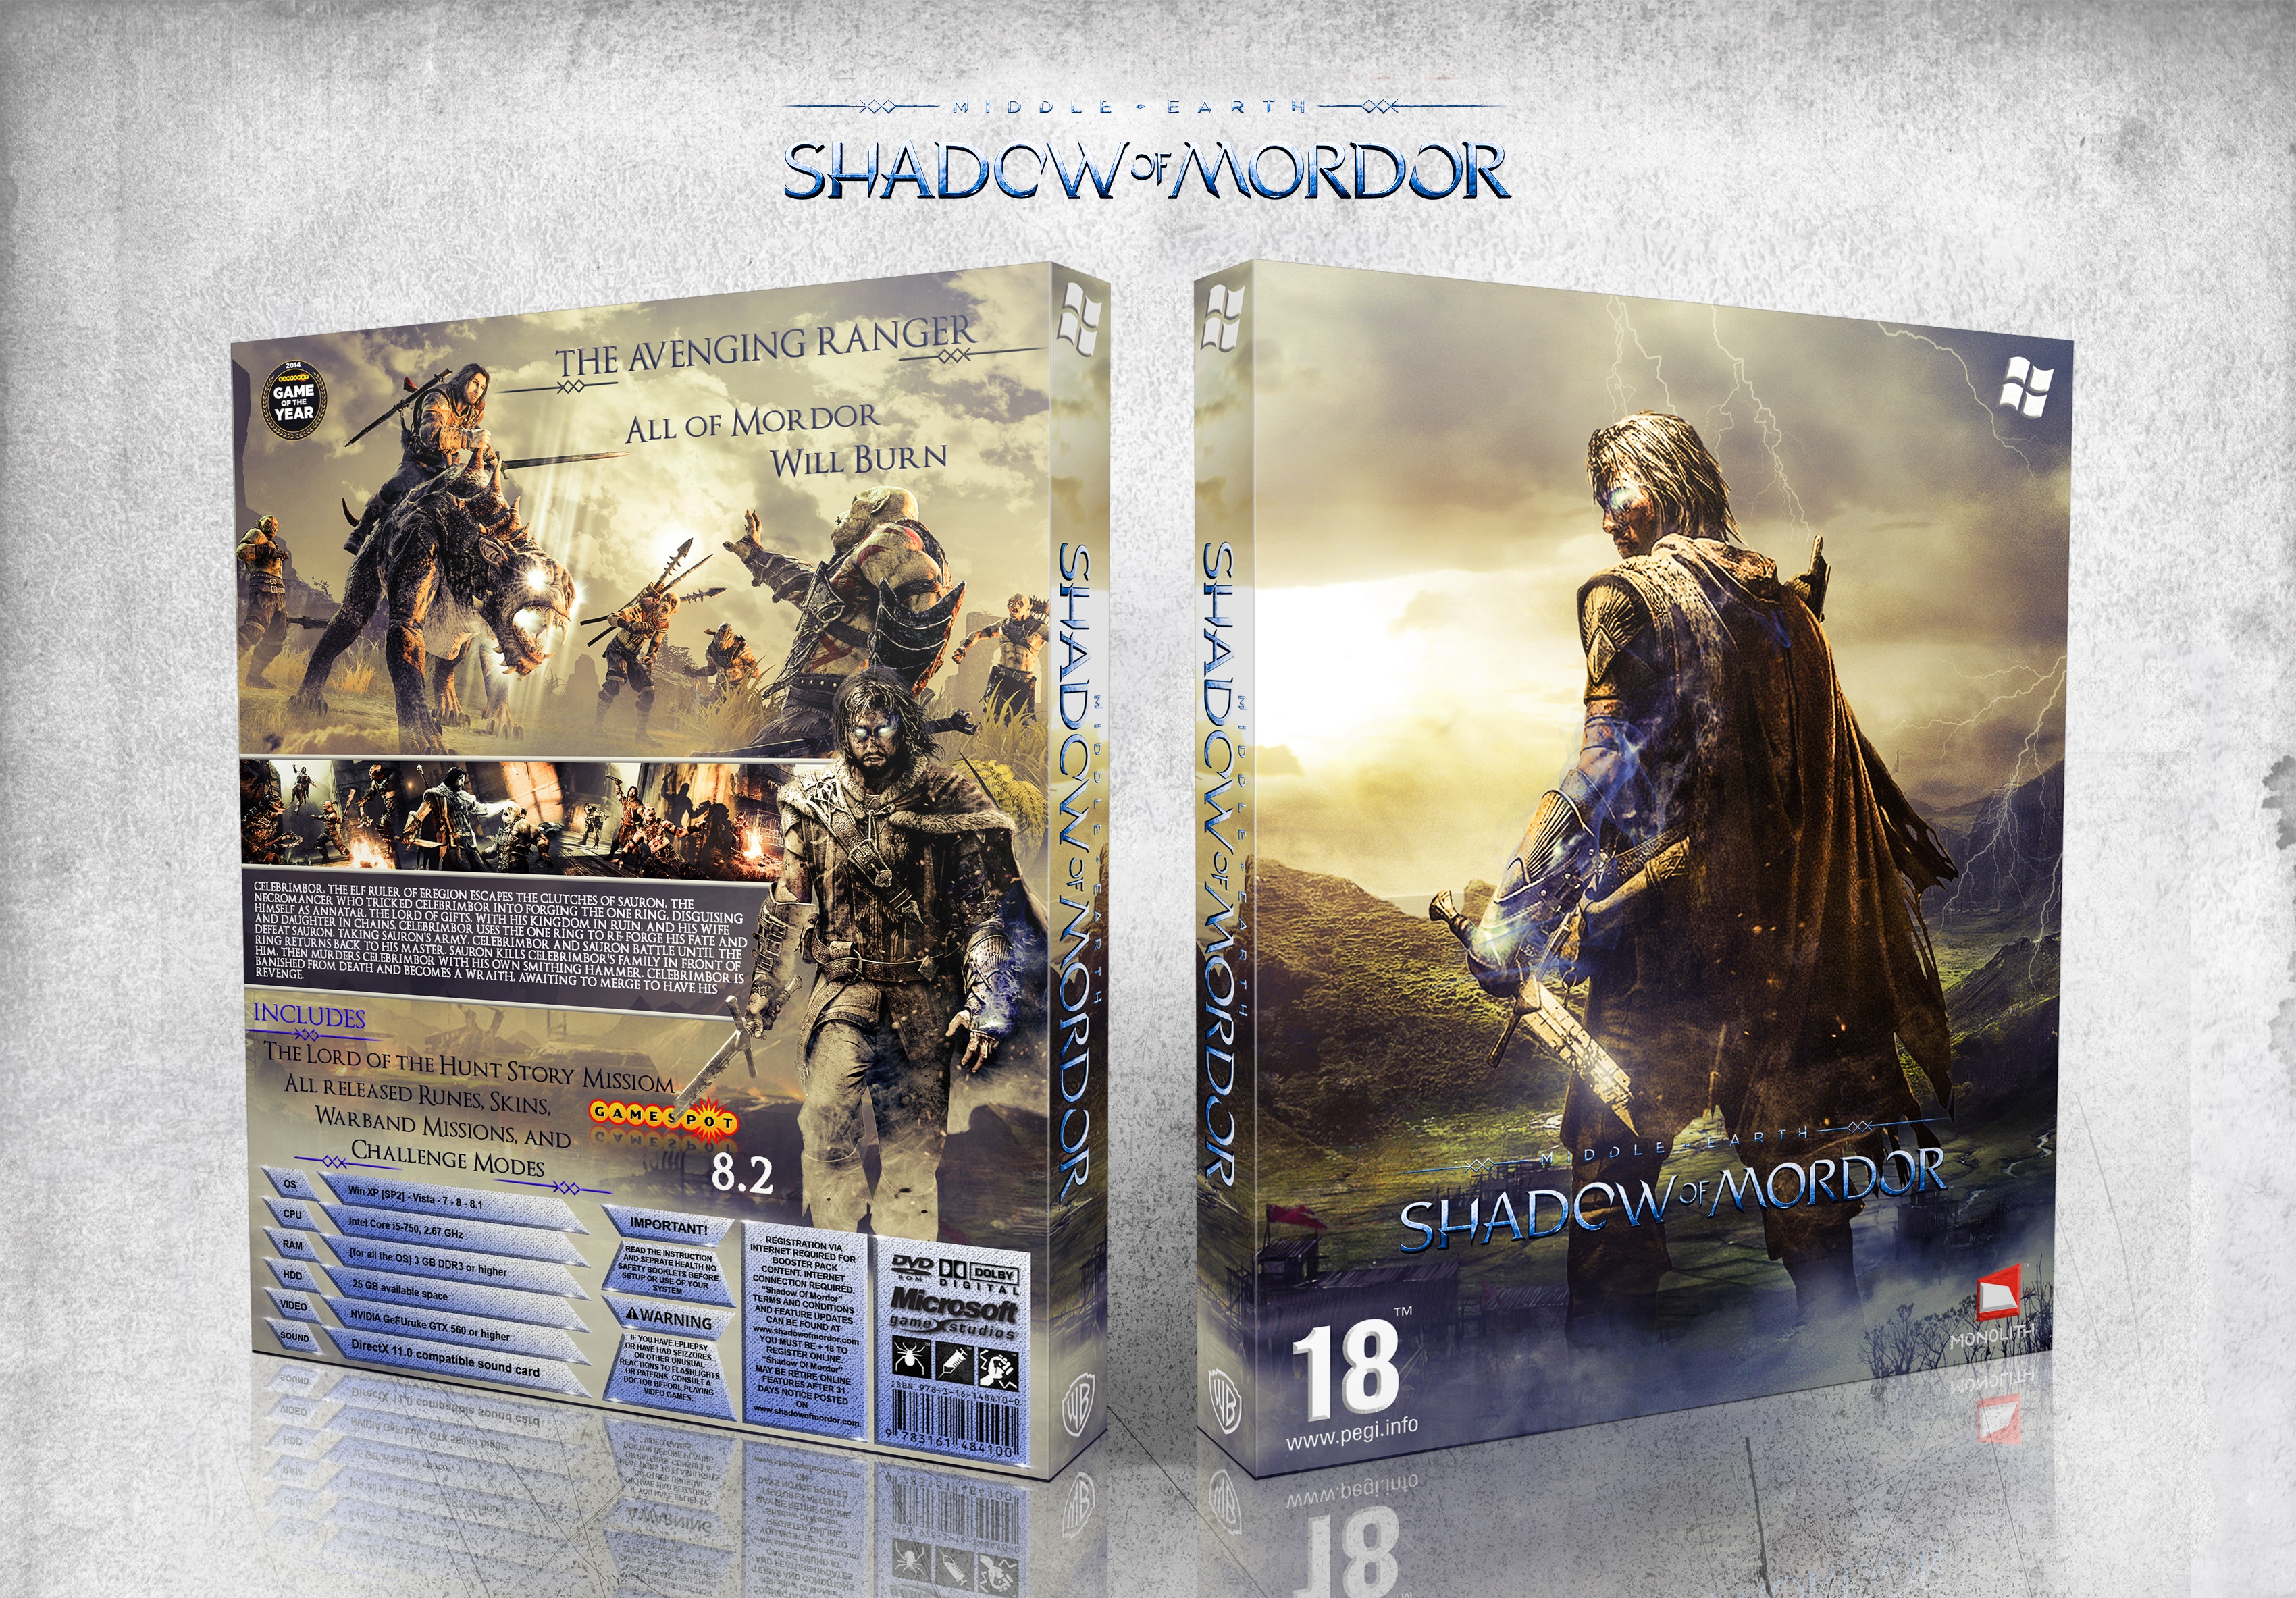 Middle-earth: Shadow of Mordor box cover